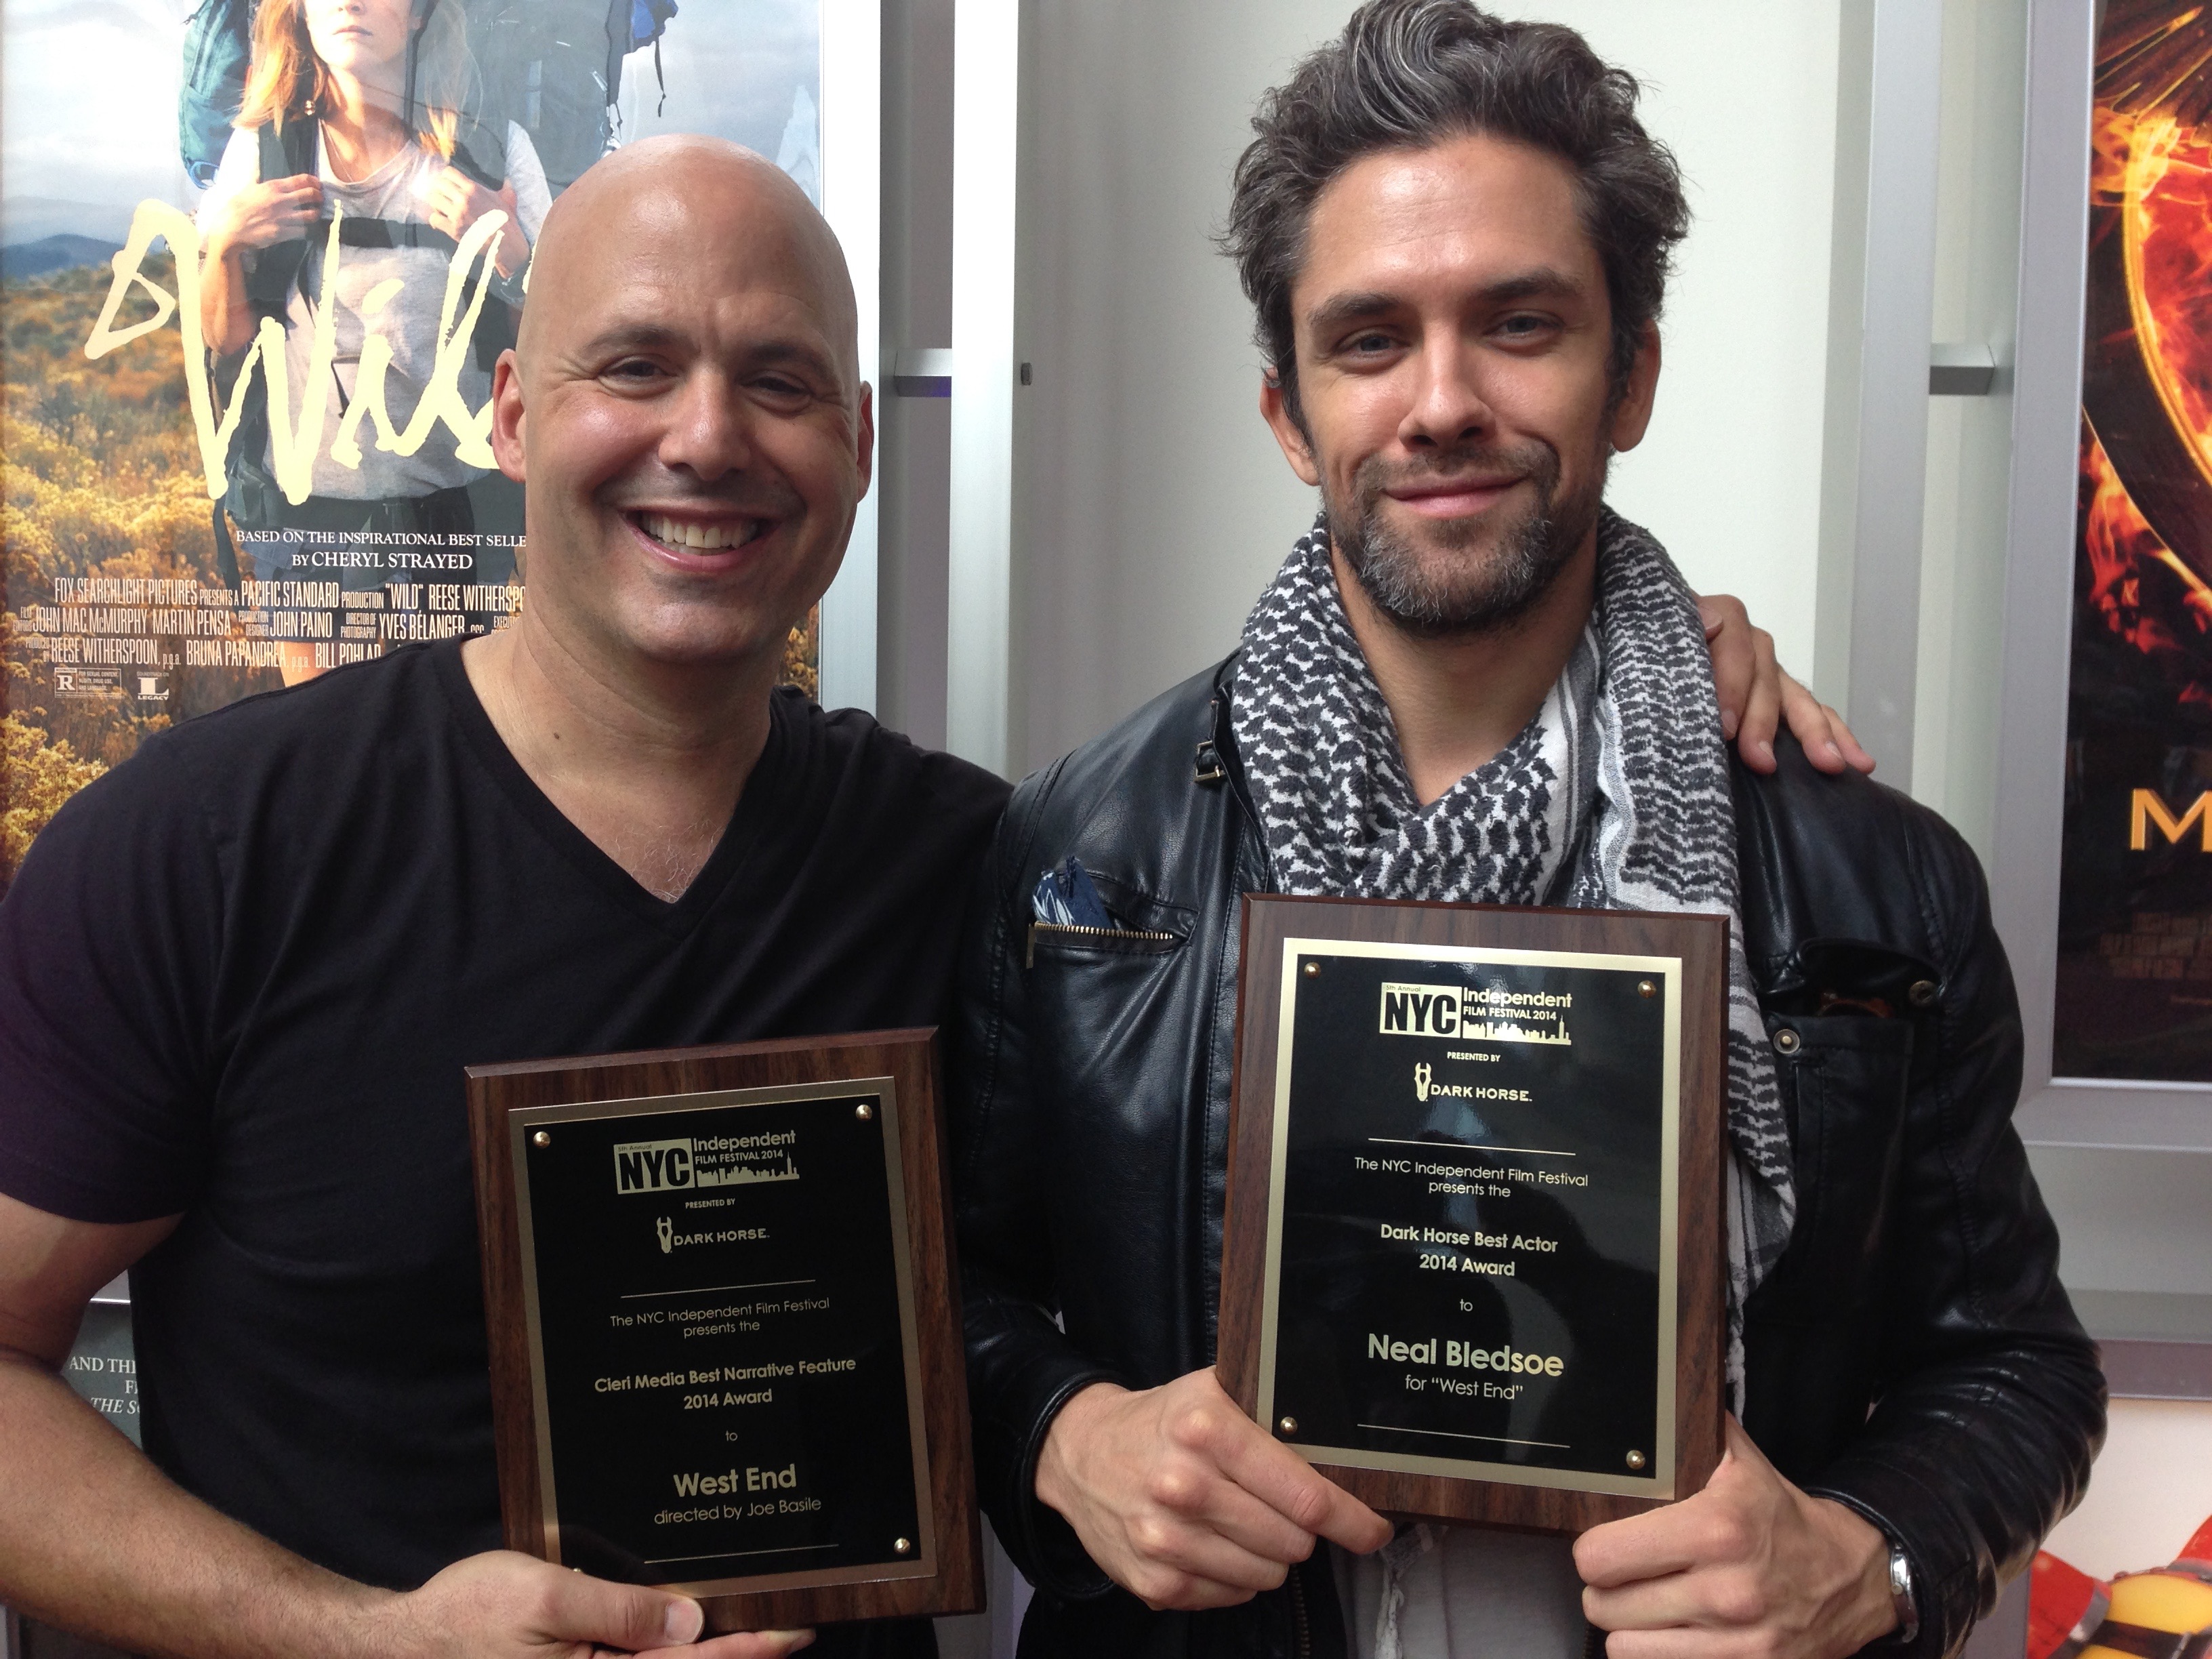 Joe Basile and Neal Bledsoe, Best Feature and Best Actor, New York Indepent Film Festival.